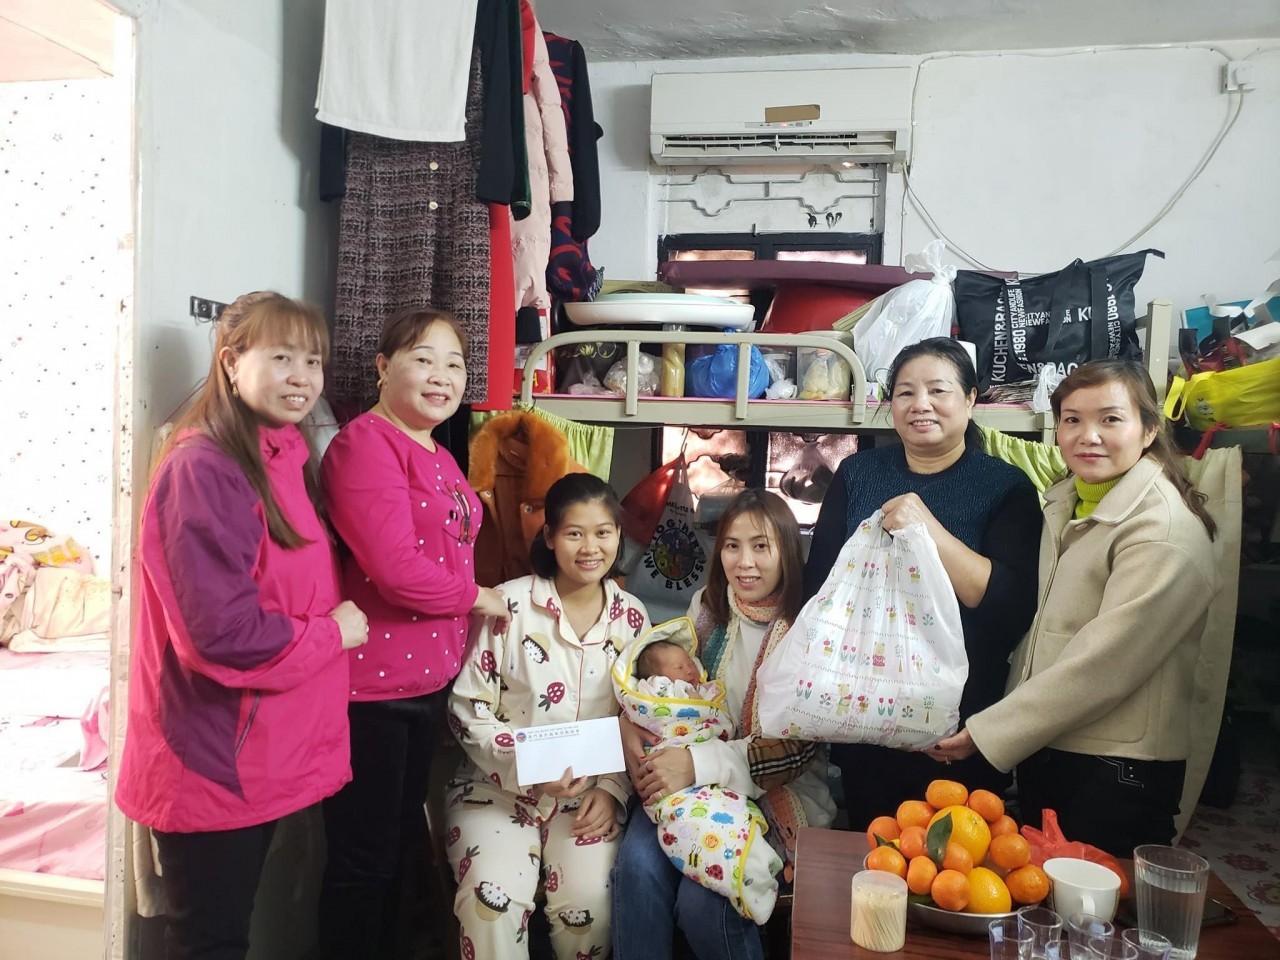 55 Tet Gifts Given to Vietnamese in Difficulty in Macau (China)